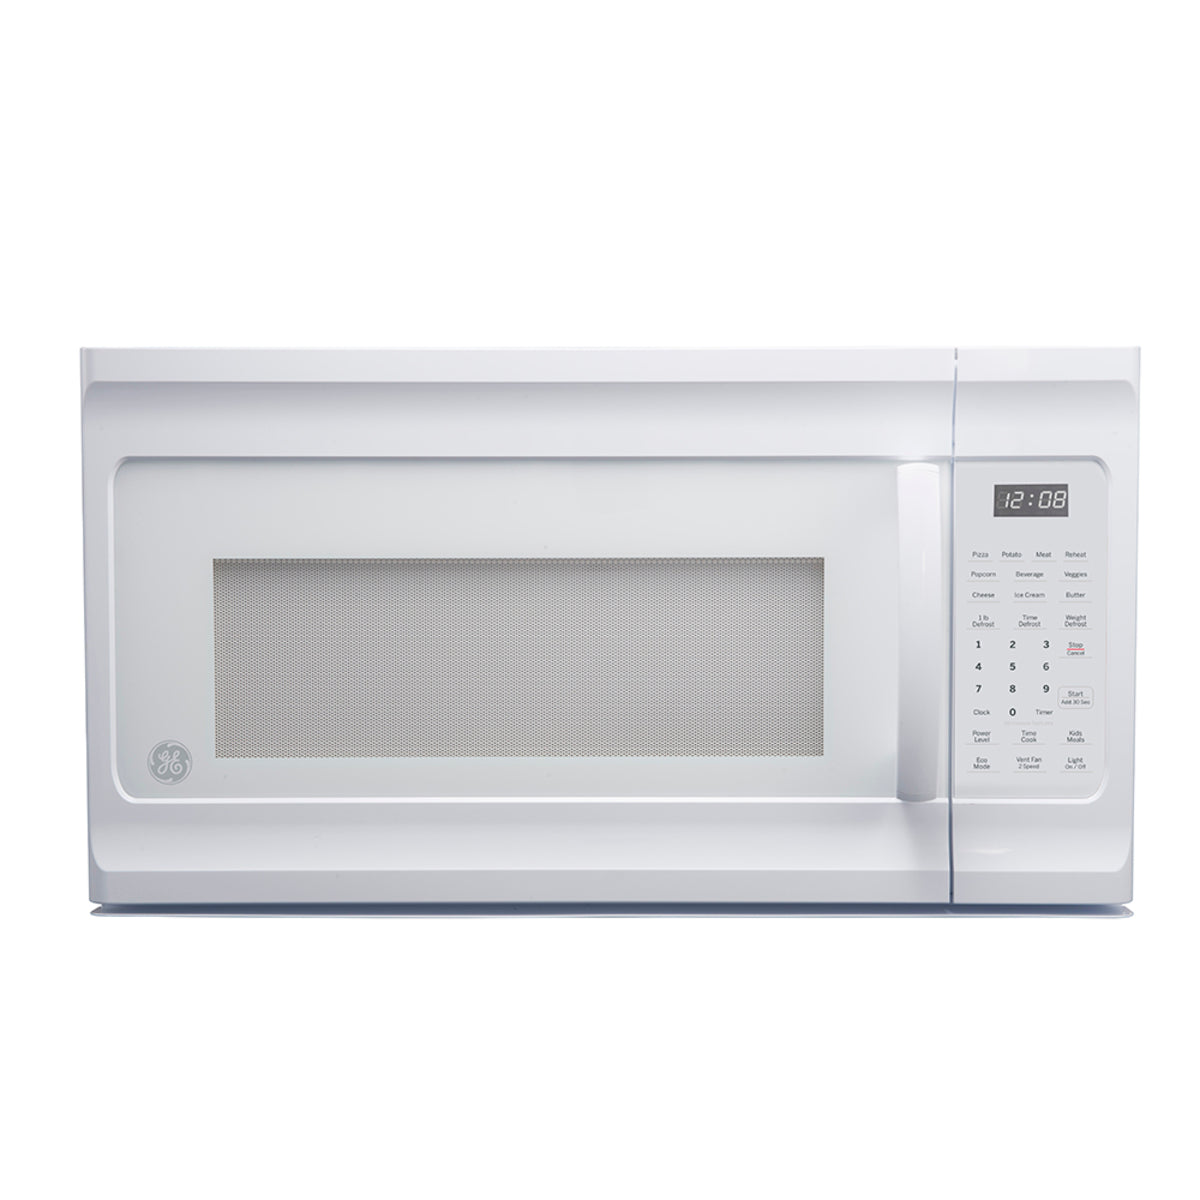 GE - 1.6 cu. Ft  Over the range Microwave in White - JVM2160DMWW